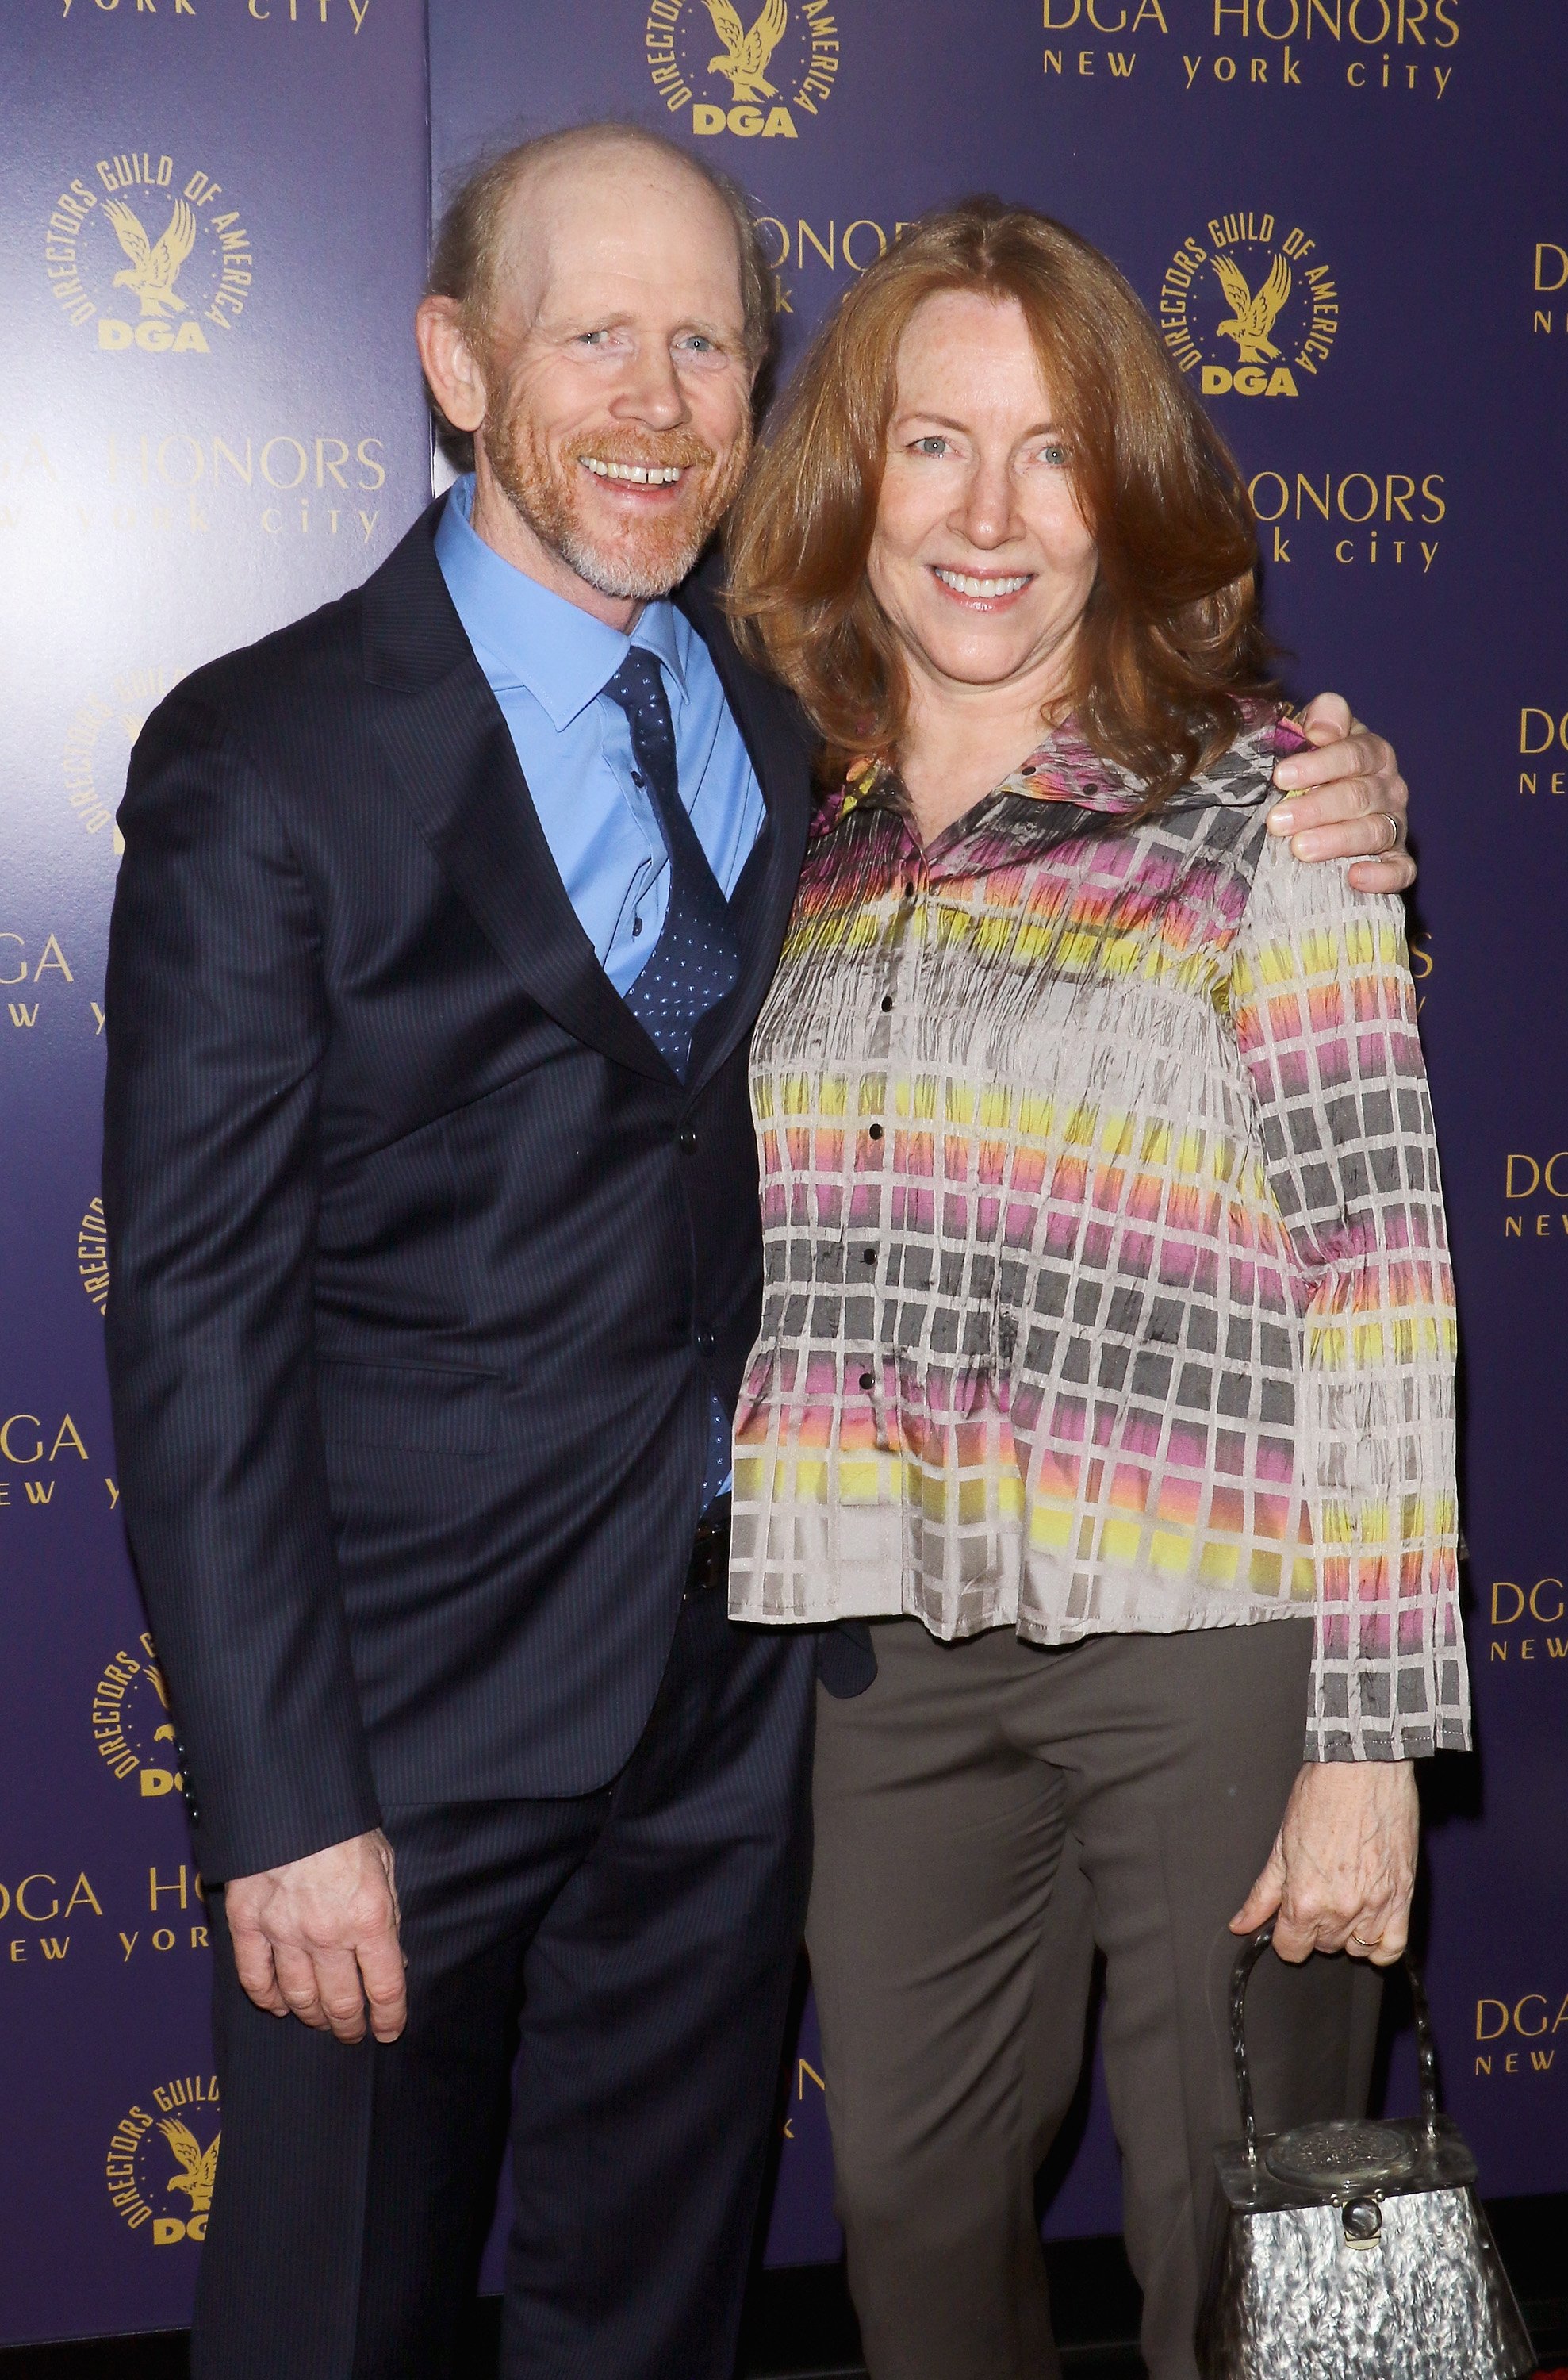 Ron Howard and Cheryl Howard attended the DGA Honors Gala 2015 at the DGA Theater on October 15, 2015, in New York City. | Source: Getty Images